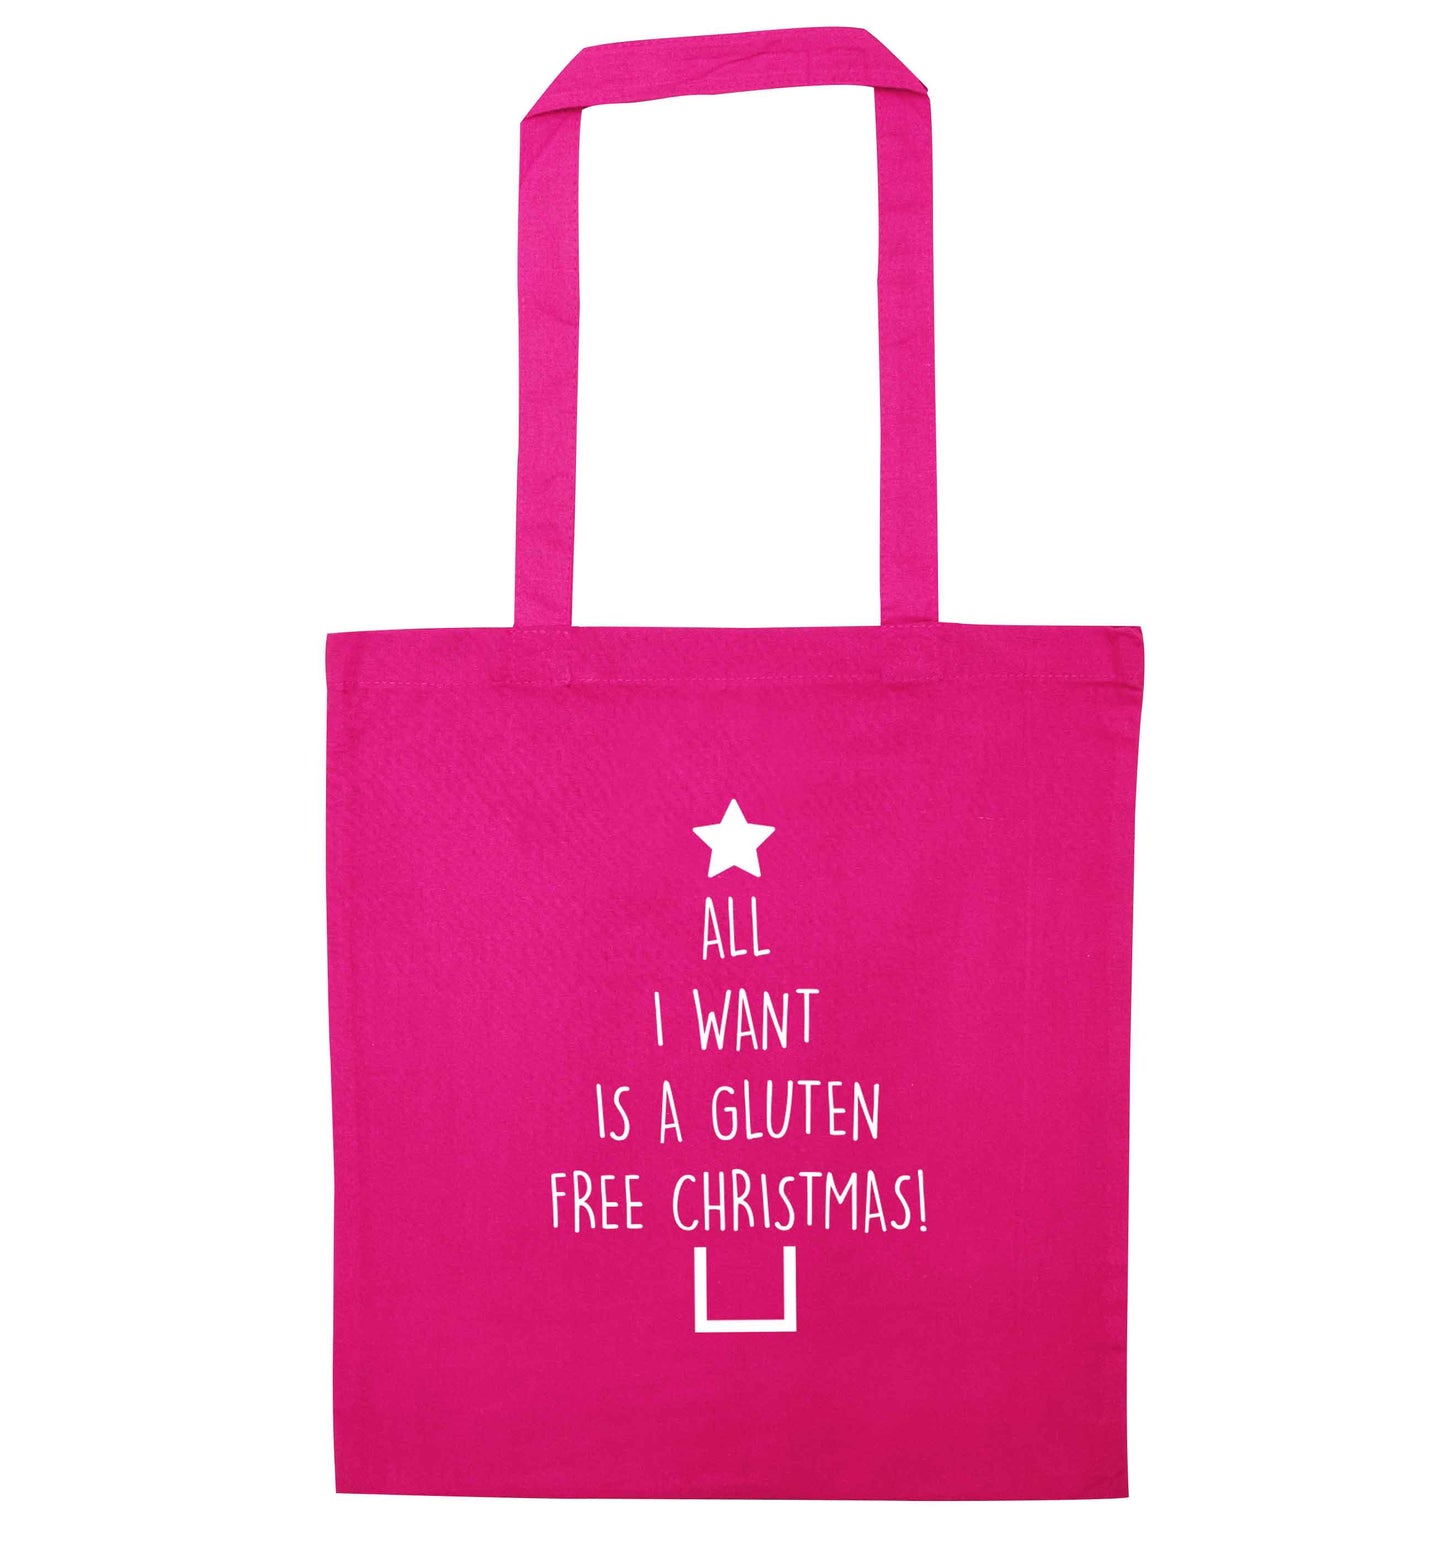 All I want is a gluten free Christmas pink tote bag